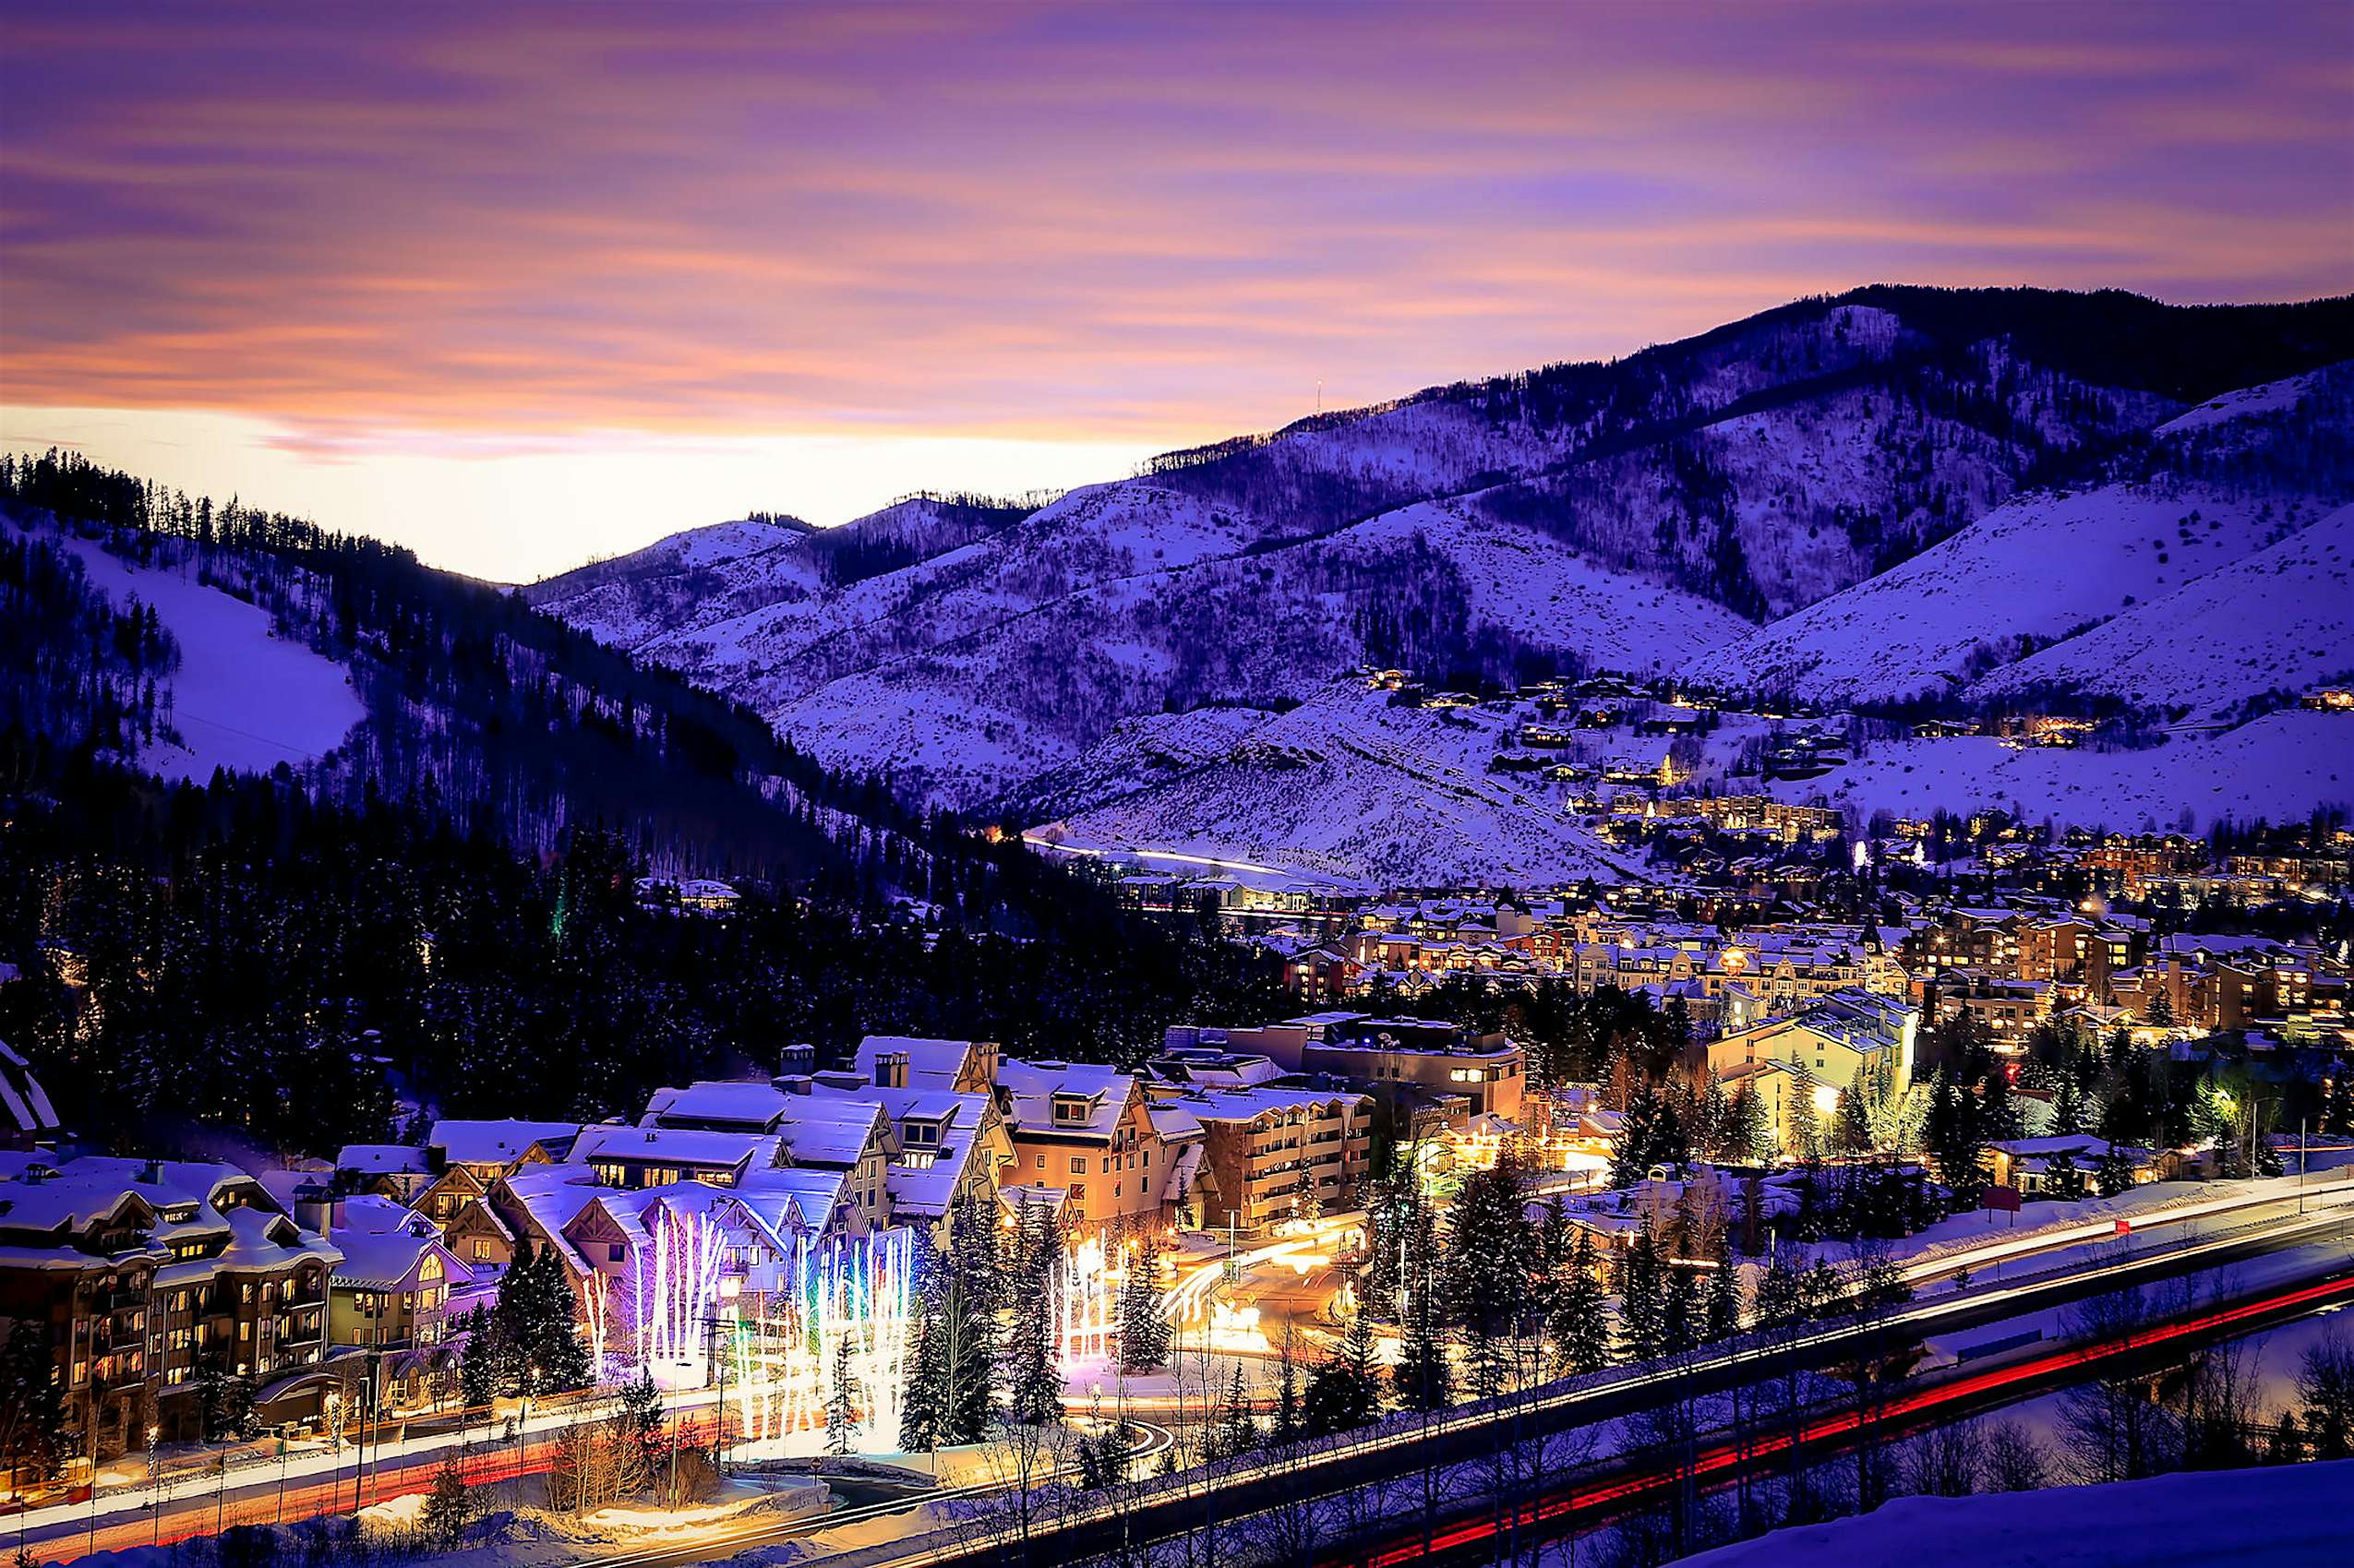 Vail, Colorado is the first sustainable mountain resort destination